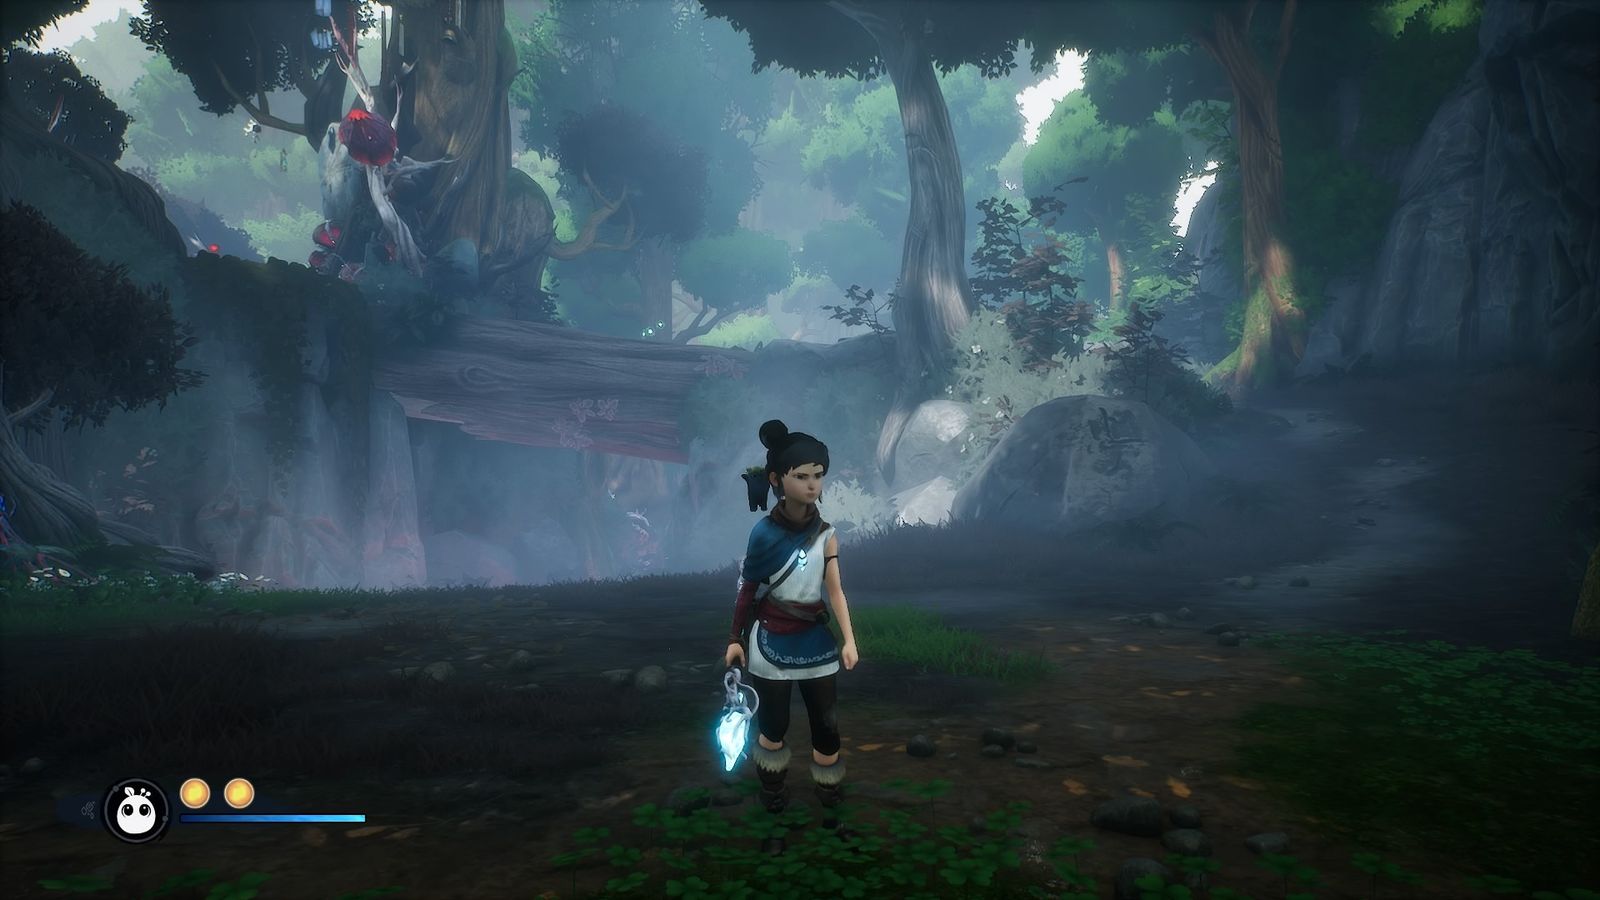  Kena standing in Wood Shrine Clearing forest path on right